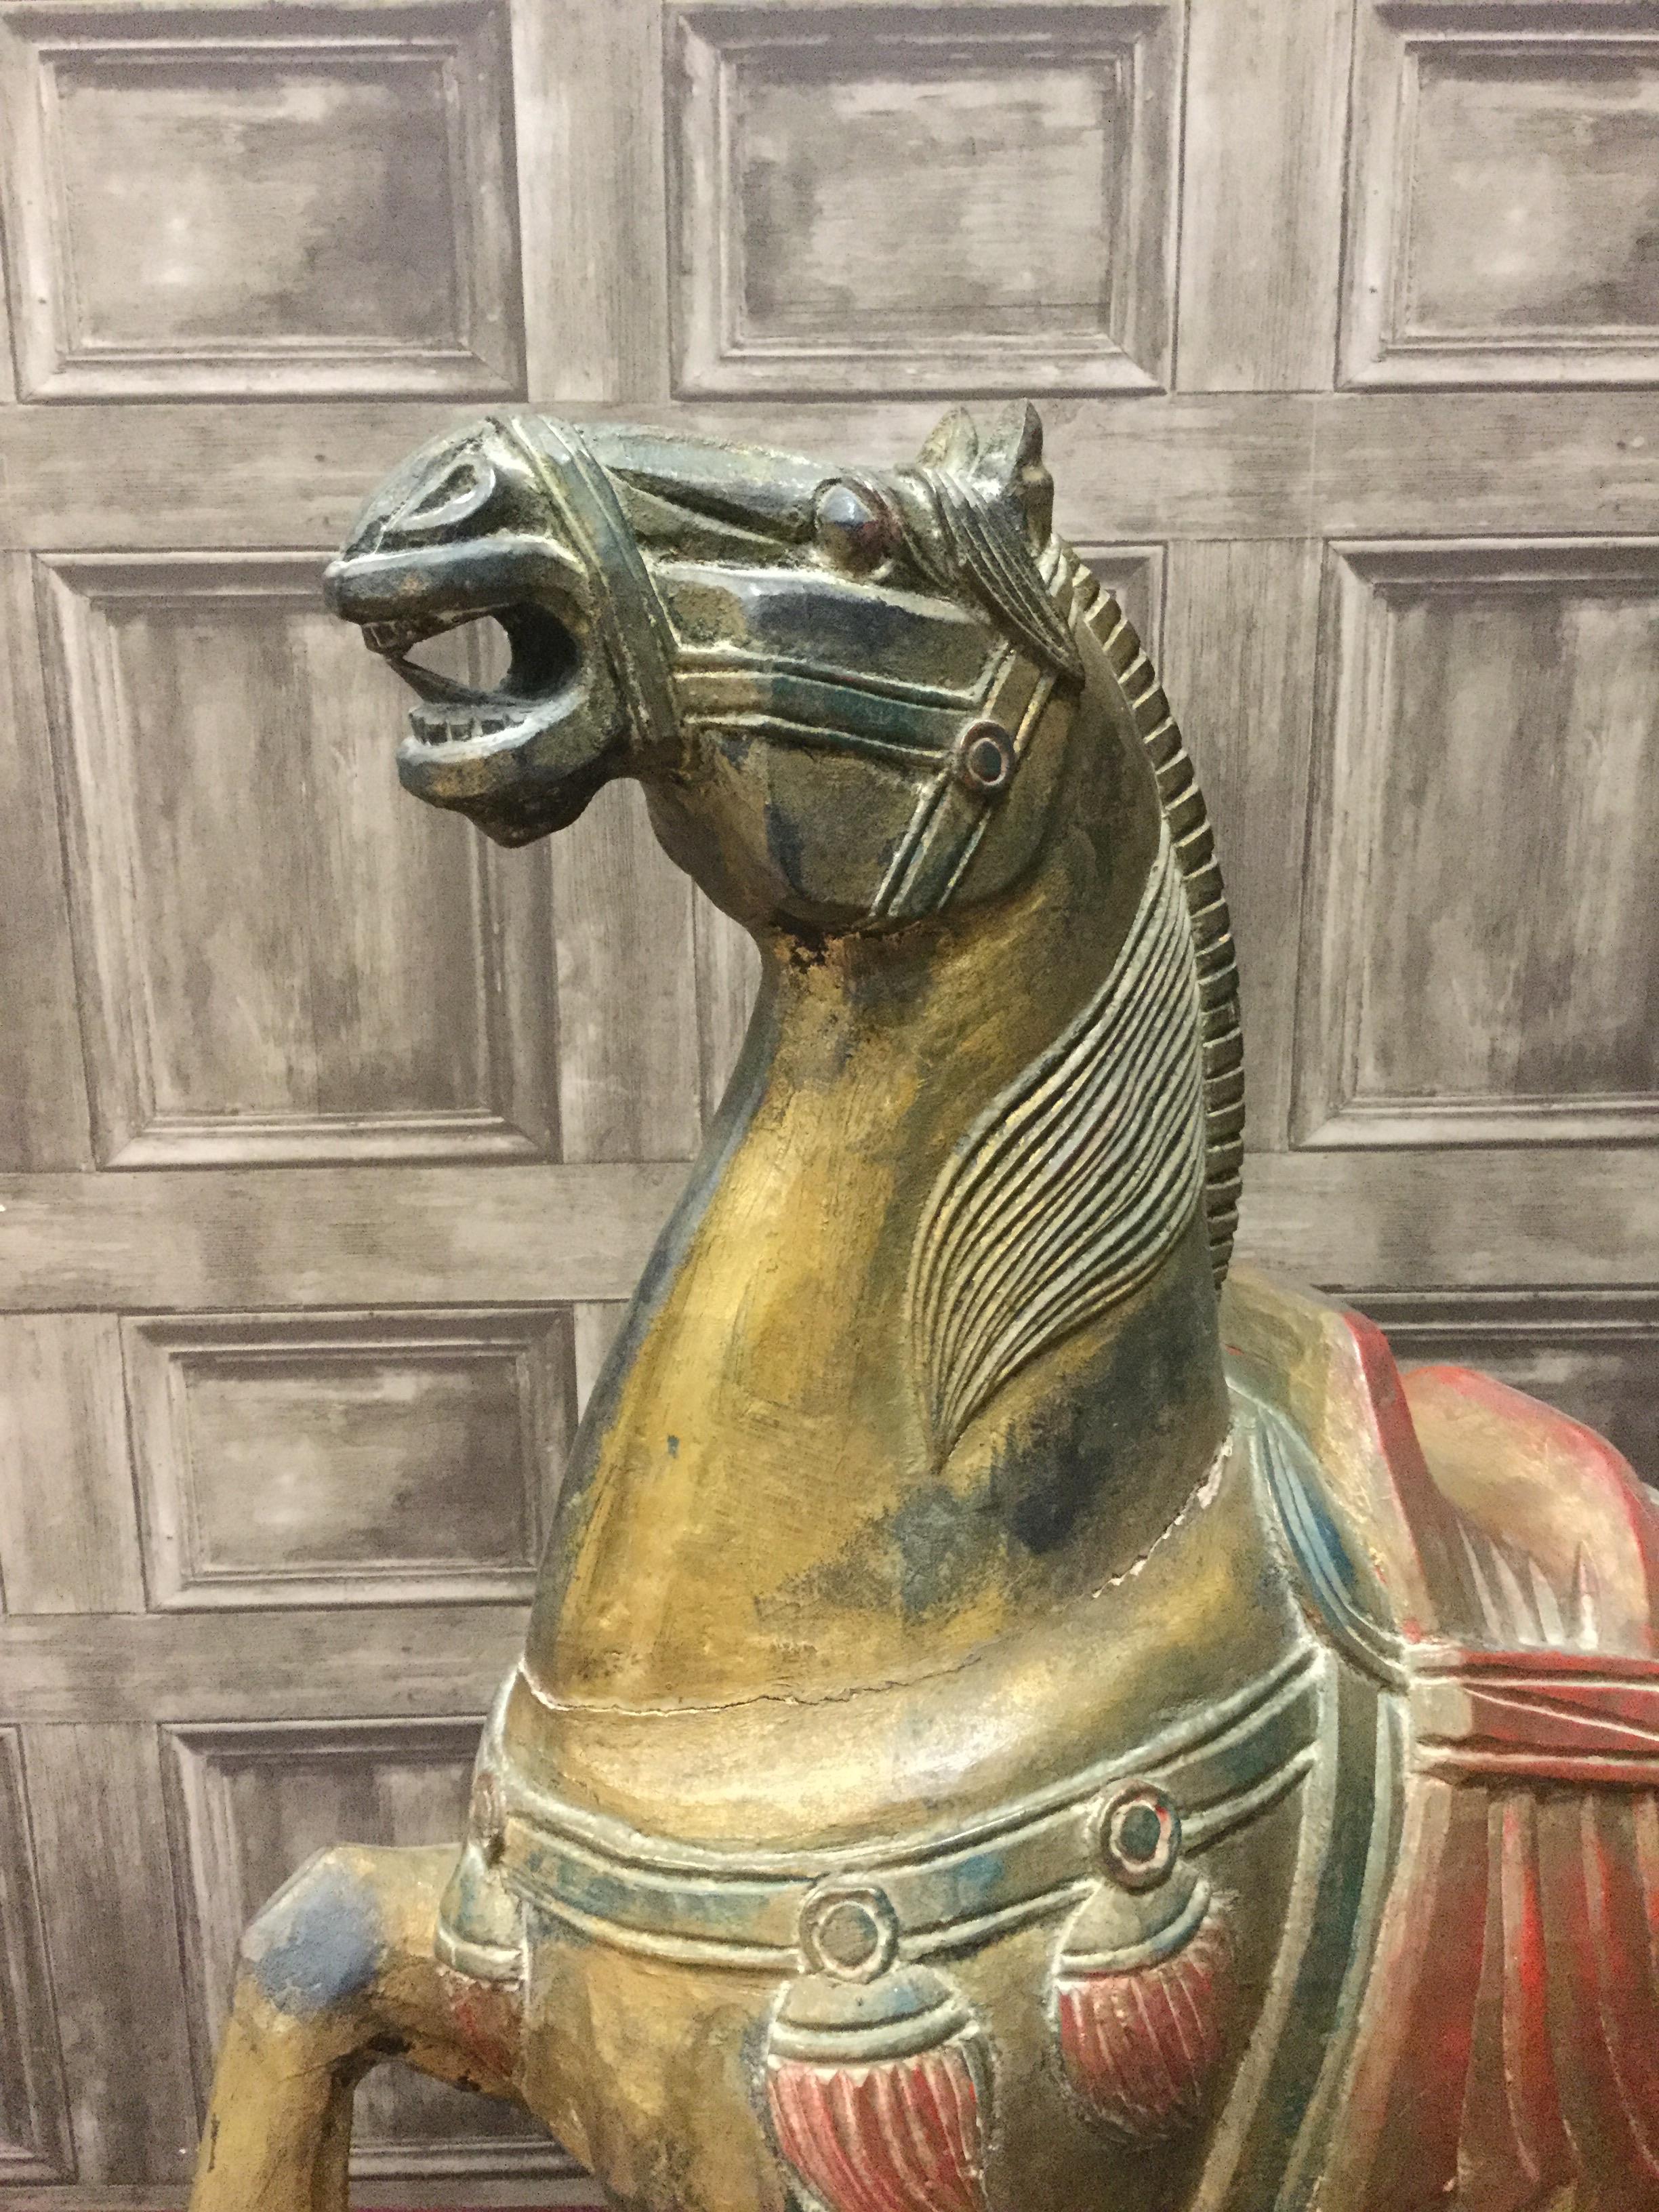 A CHINESE CARVED AND GILDED WOODEN FIGURE OF A REARING HORSE - Image 2 of 4